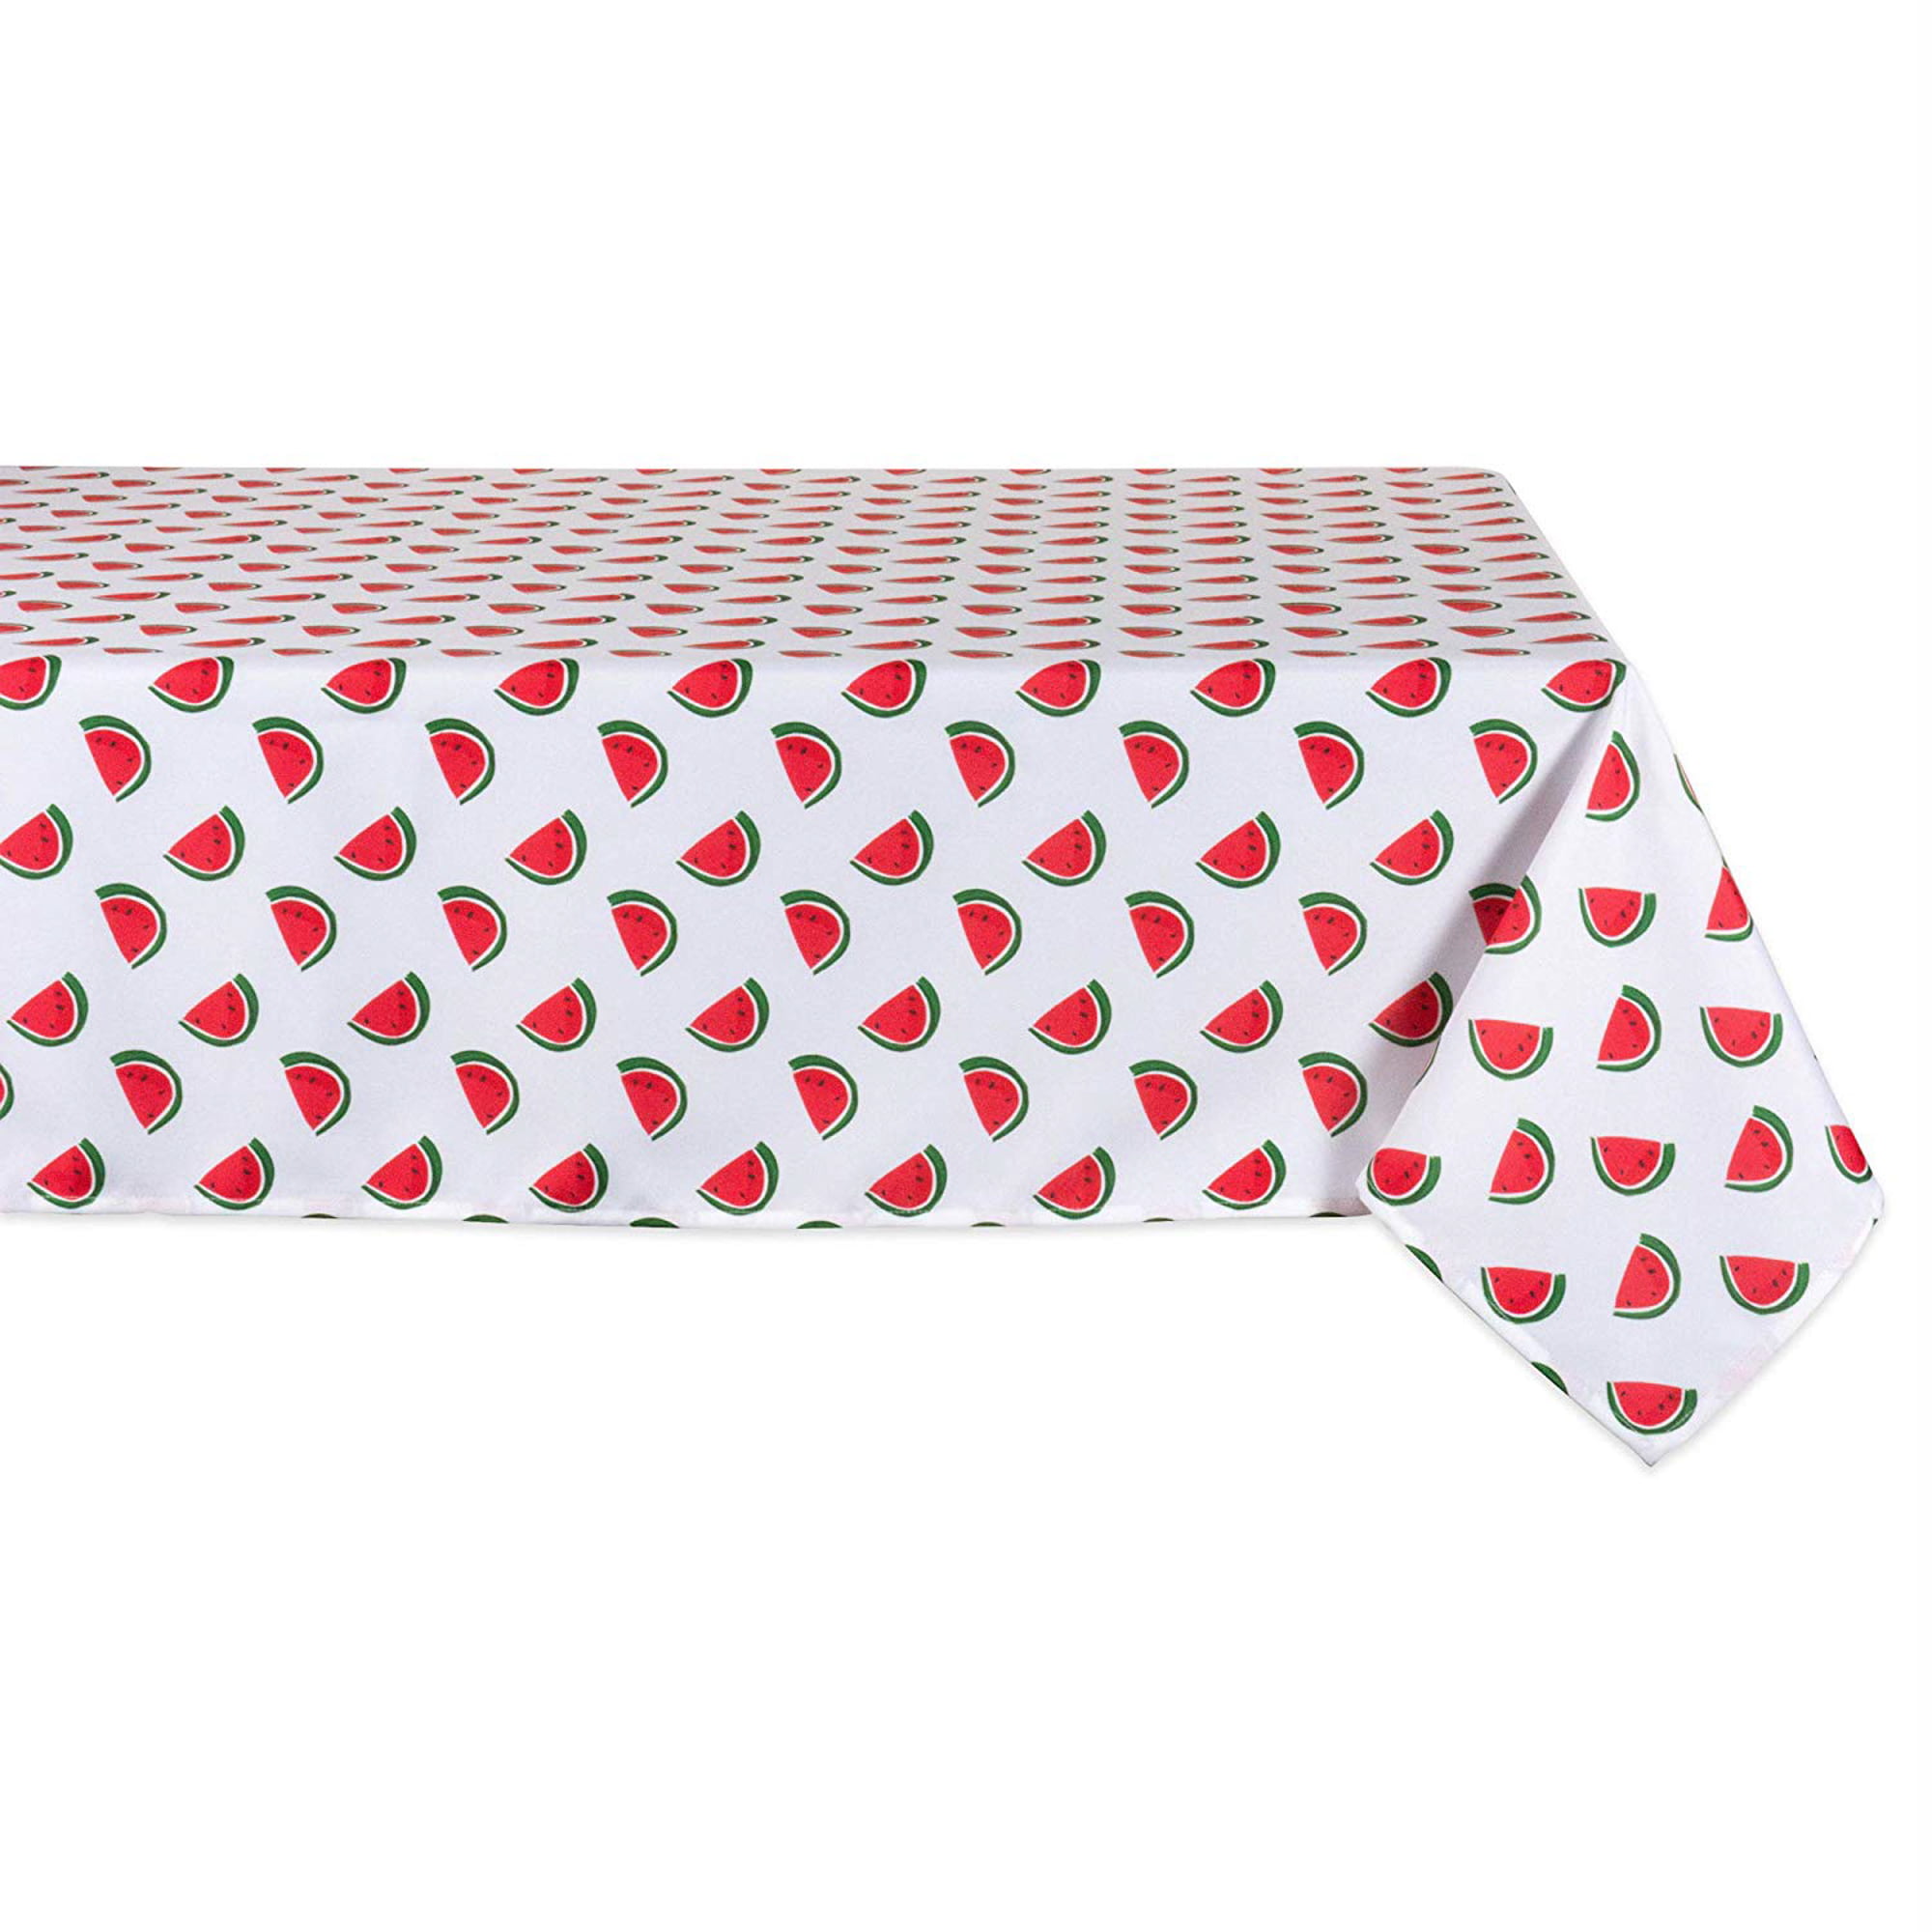 Fennco Styles Colorful Watermelon Printed Summer Decor Tablecloth Table Topper 55 Square